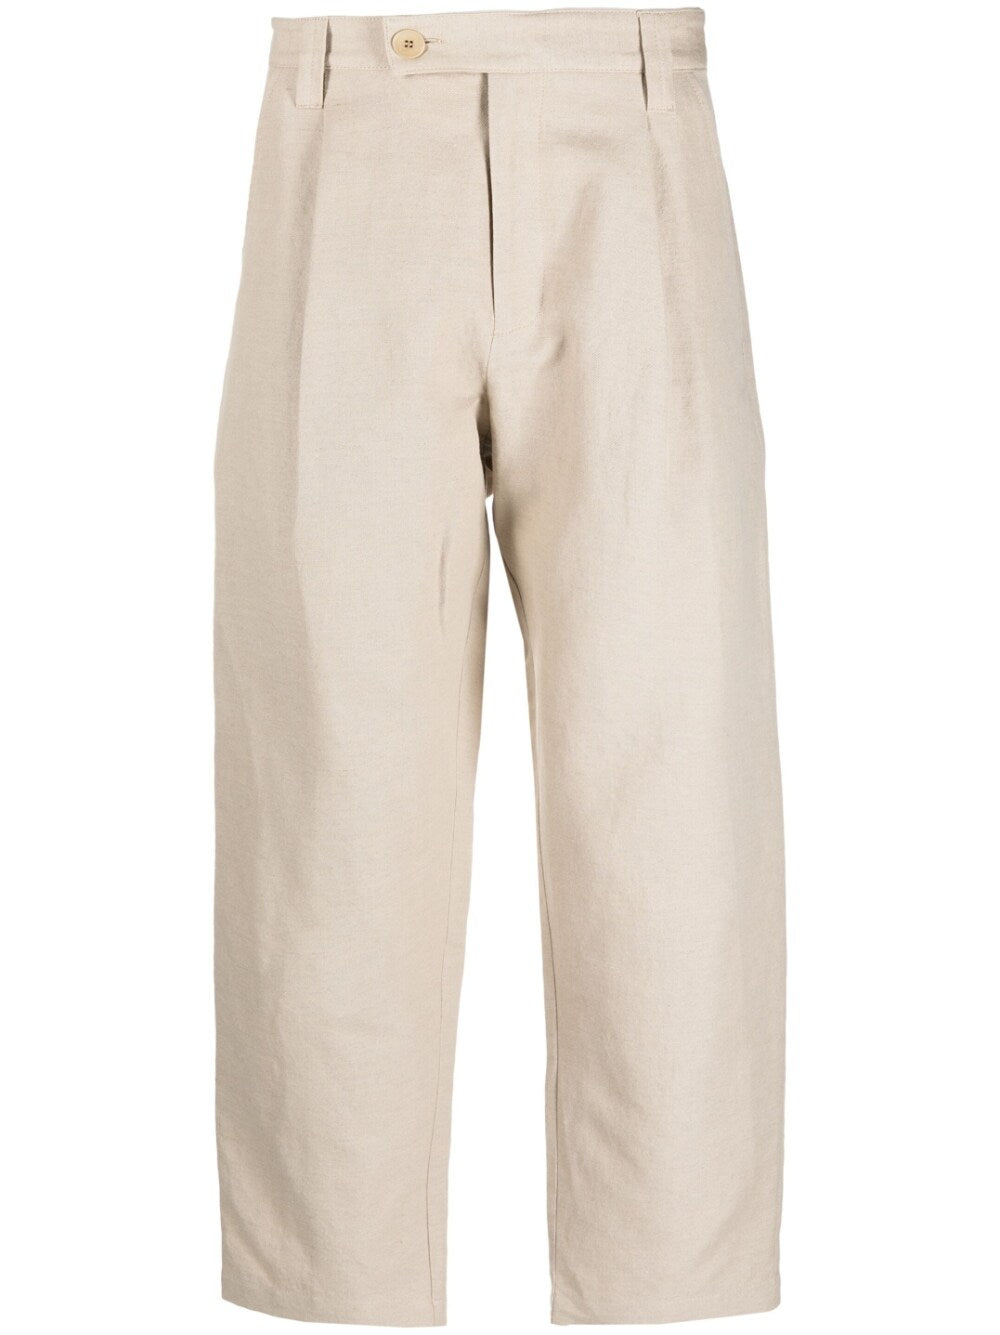 A.P.C. Trousers Beige-men > clothing > trousers-A.P.C.-52-Beige-Urbanheer